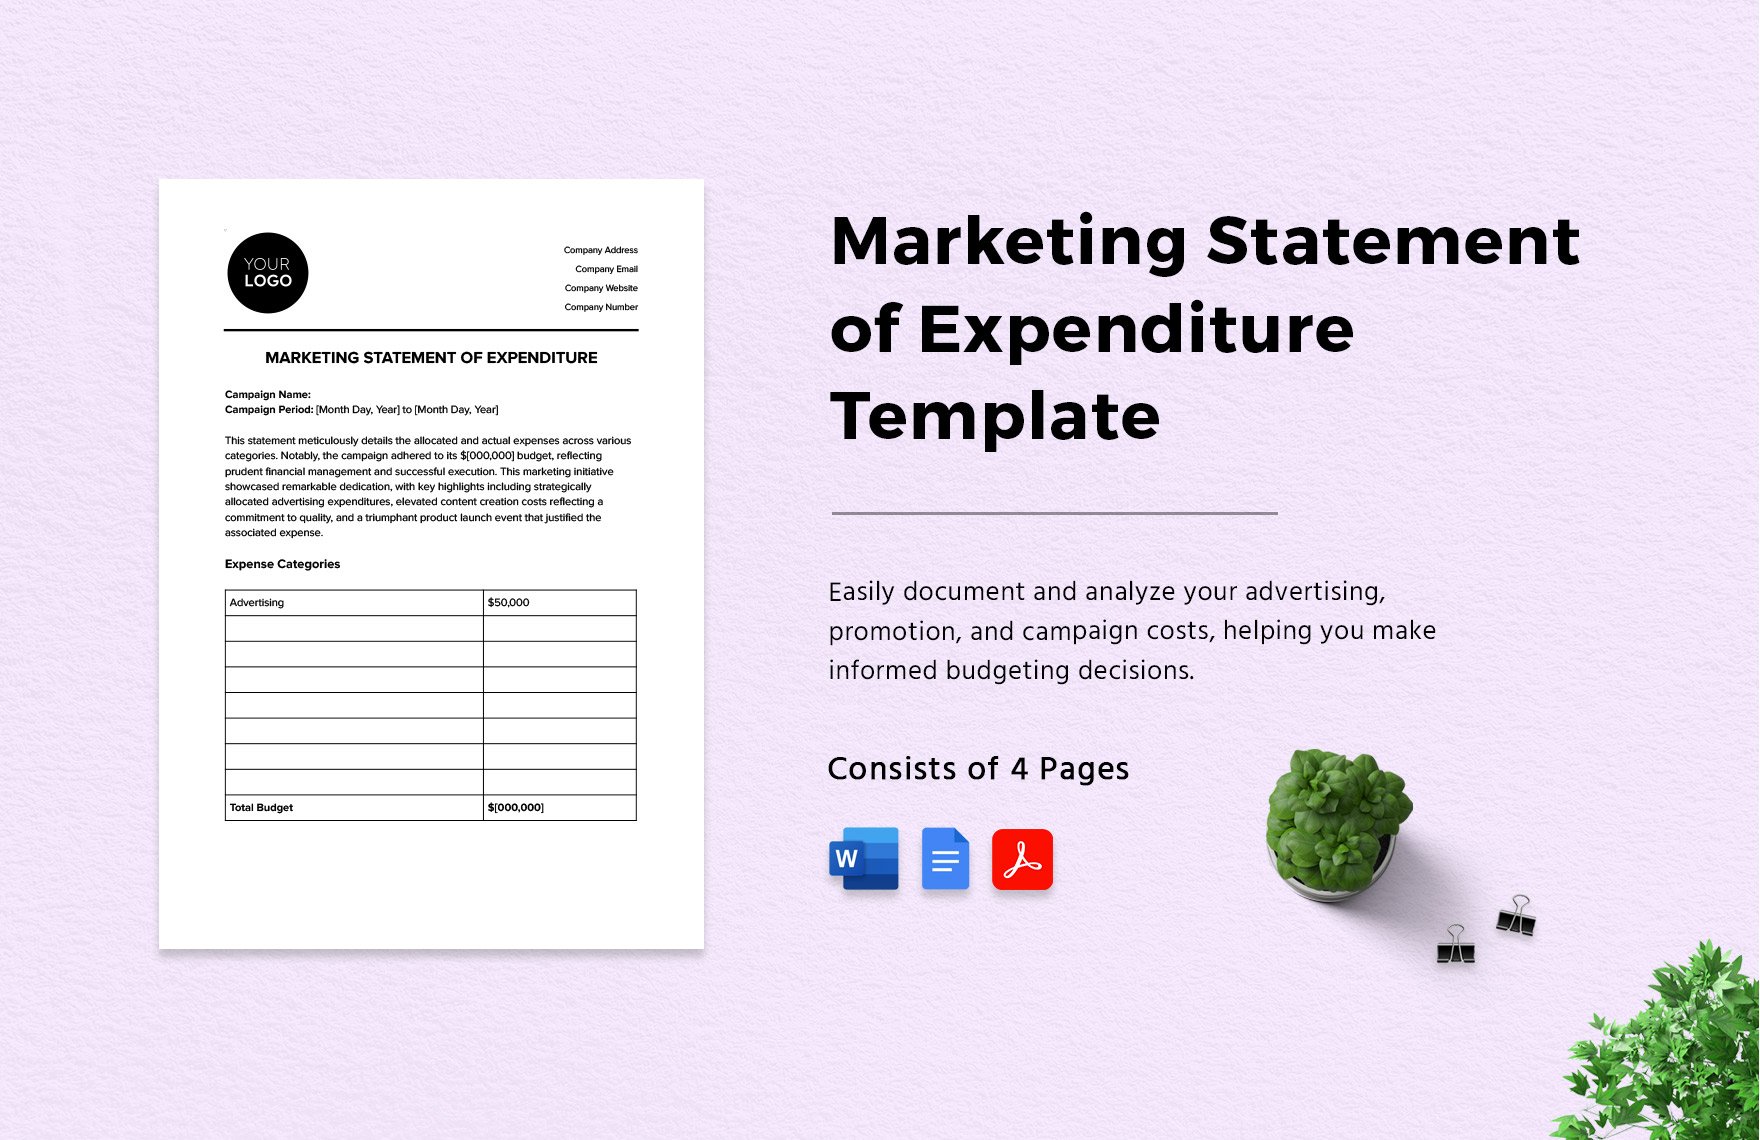 Marketing Statement of Expenditure Template